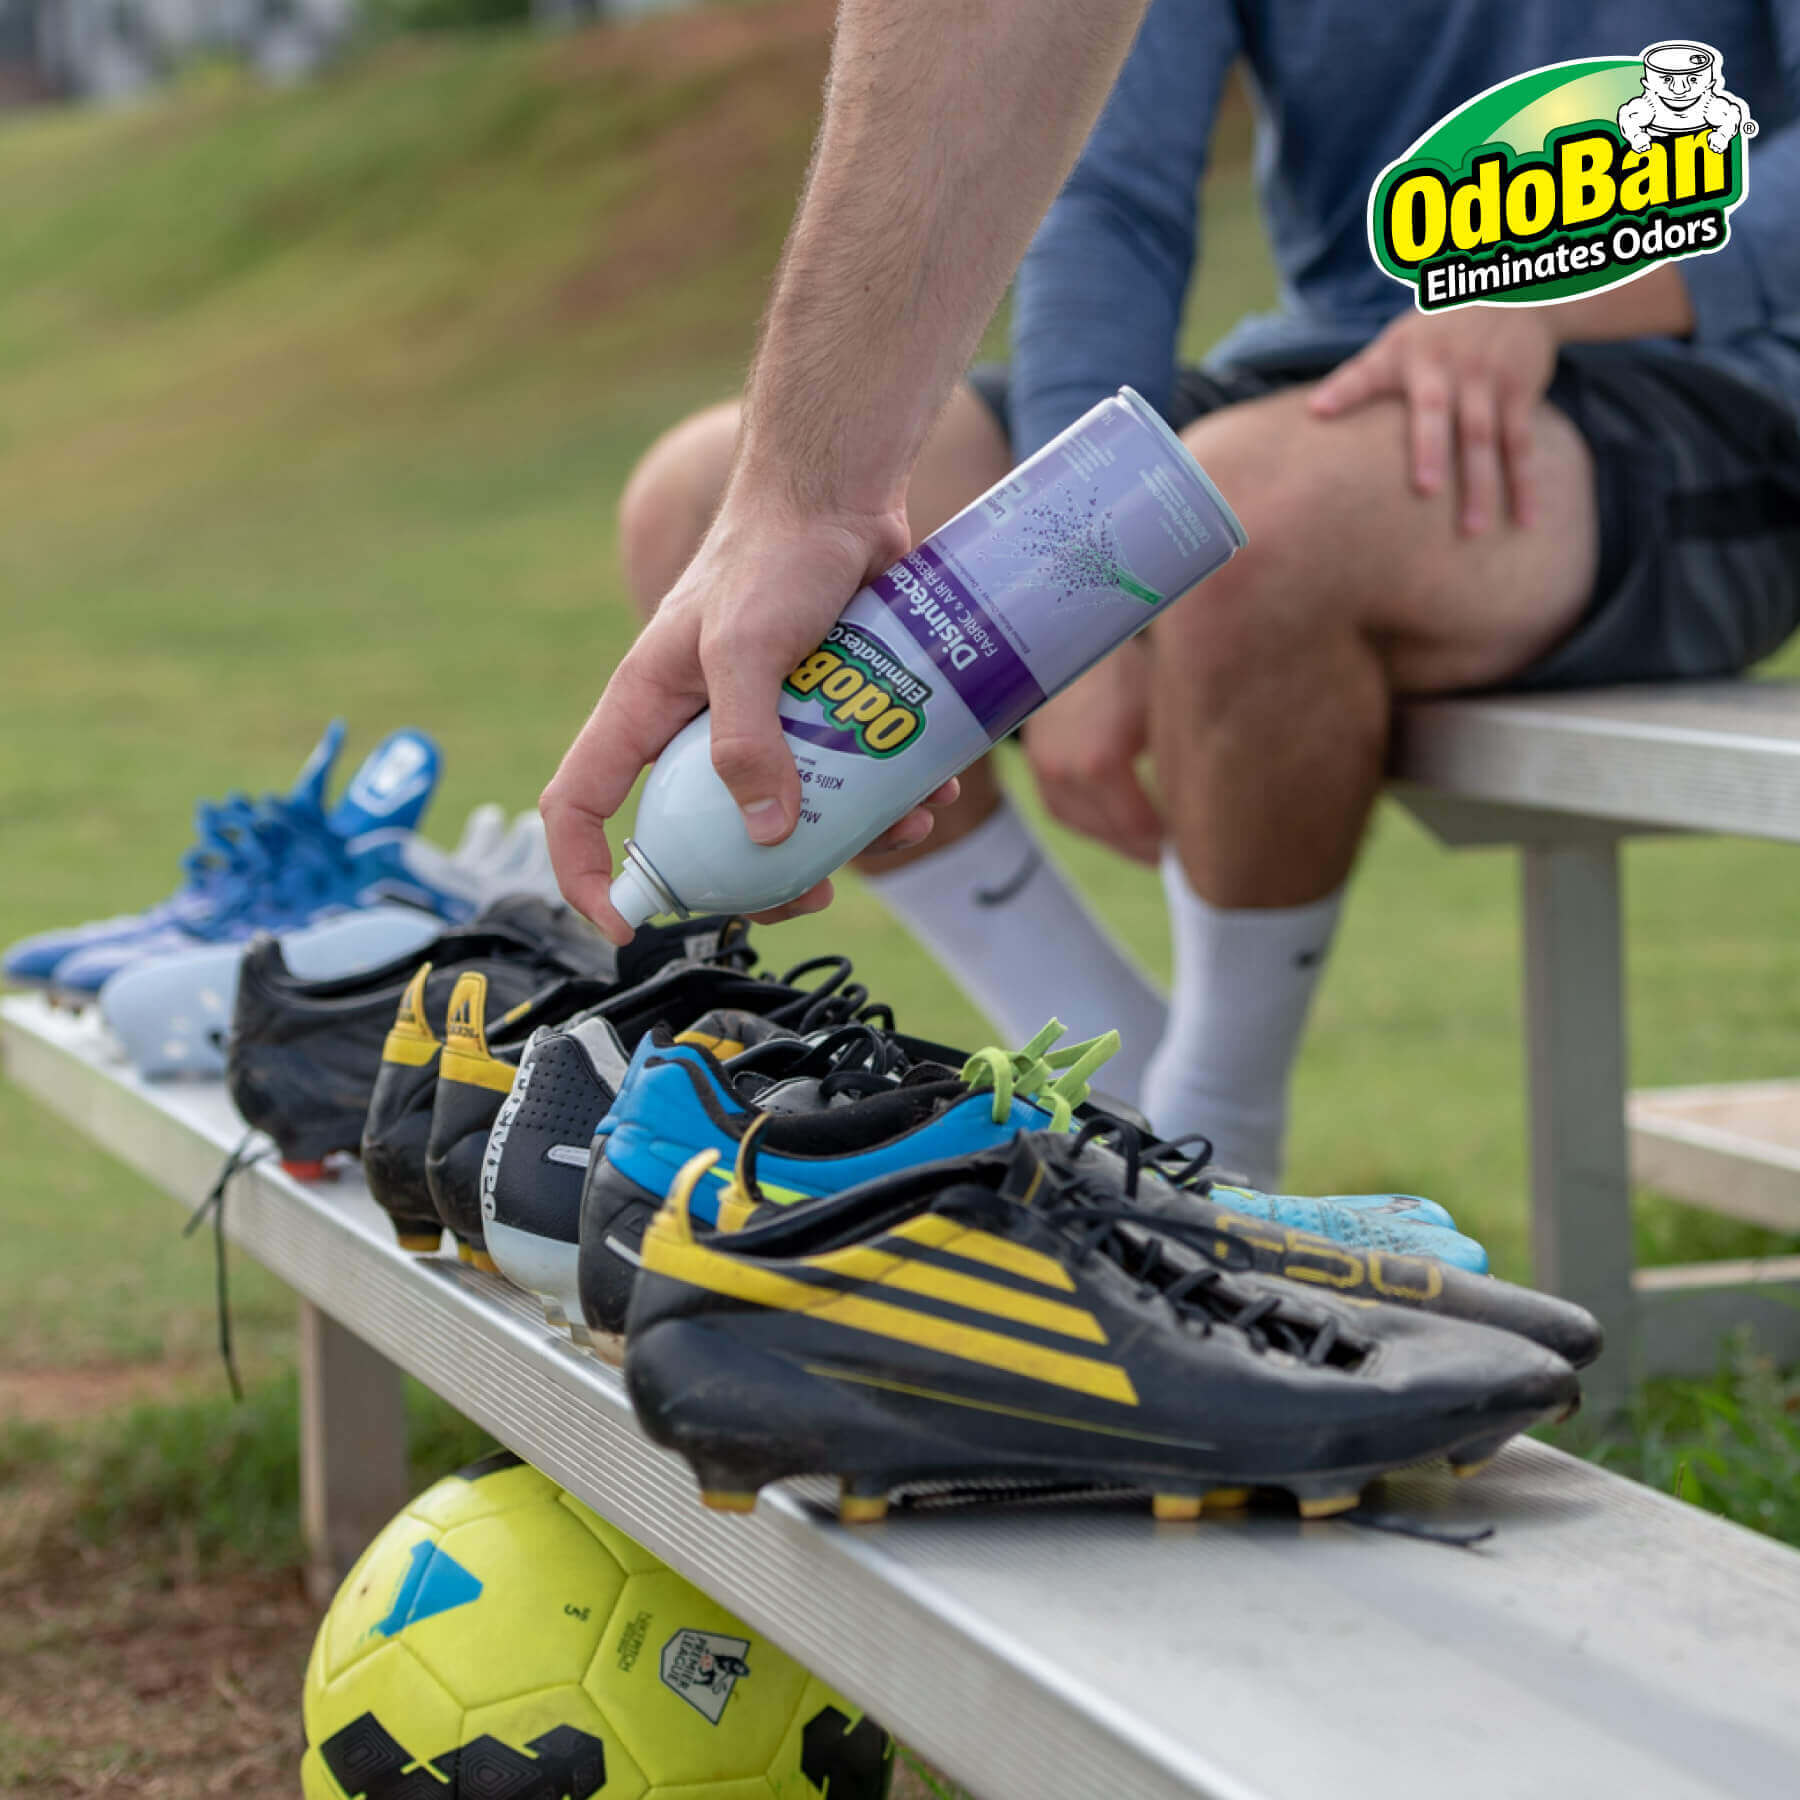 Man spraying OdoBan in smelly Soccer cleats.